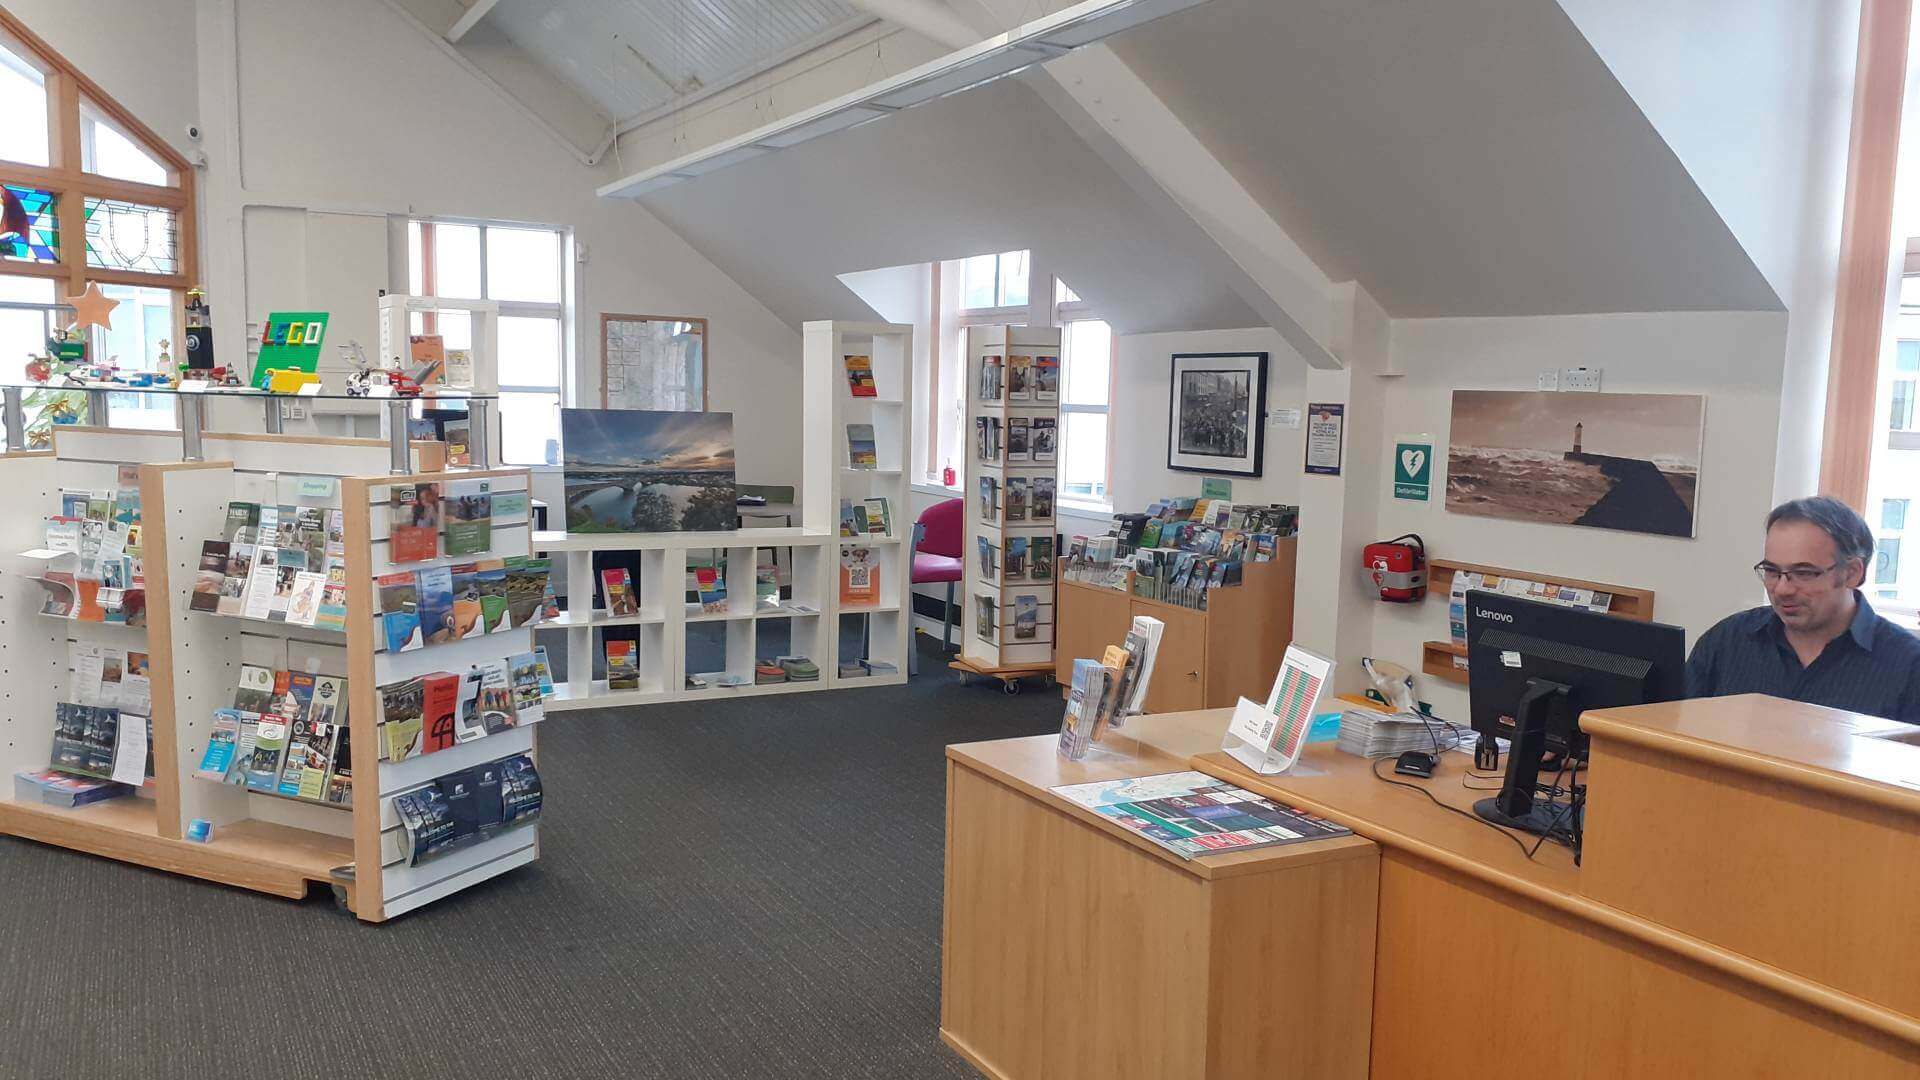 Berwick Tourist Information Centre offer a warm welcome